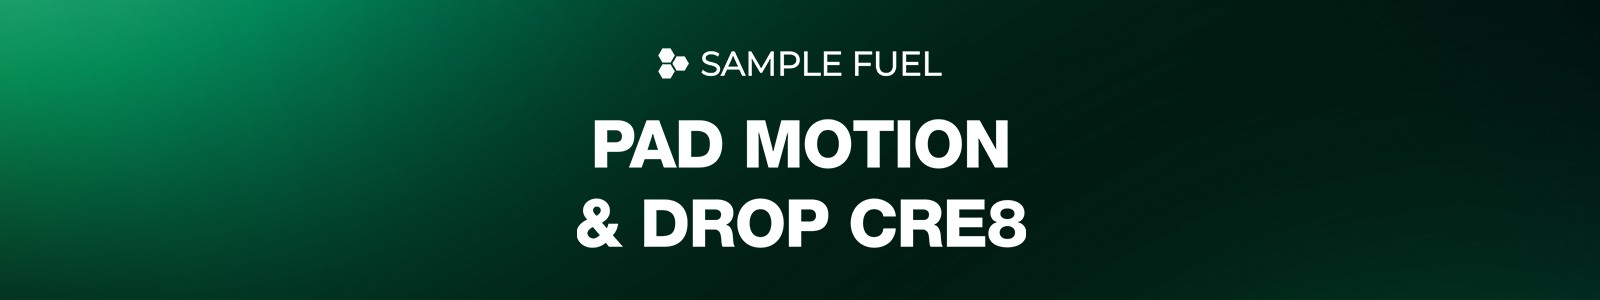 Pad Motion & Drop-CRE8 Analog Expansion Bundle by Sample Fuel